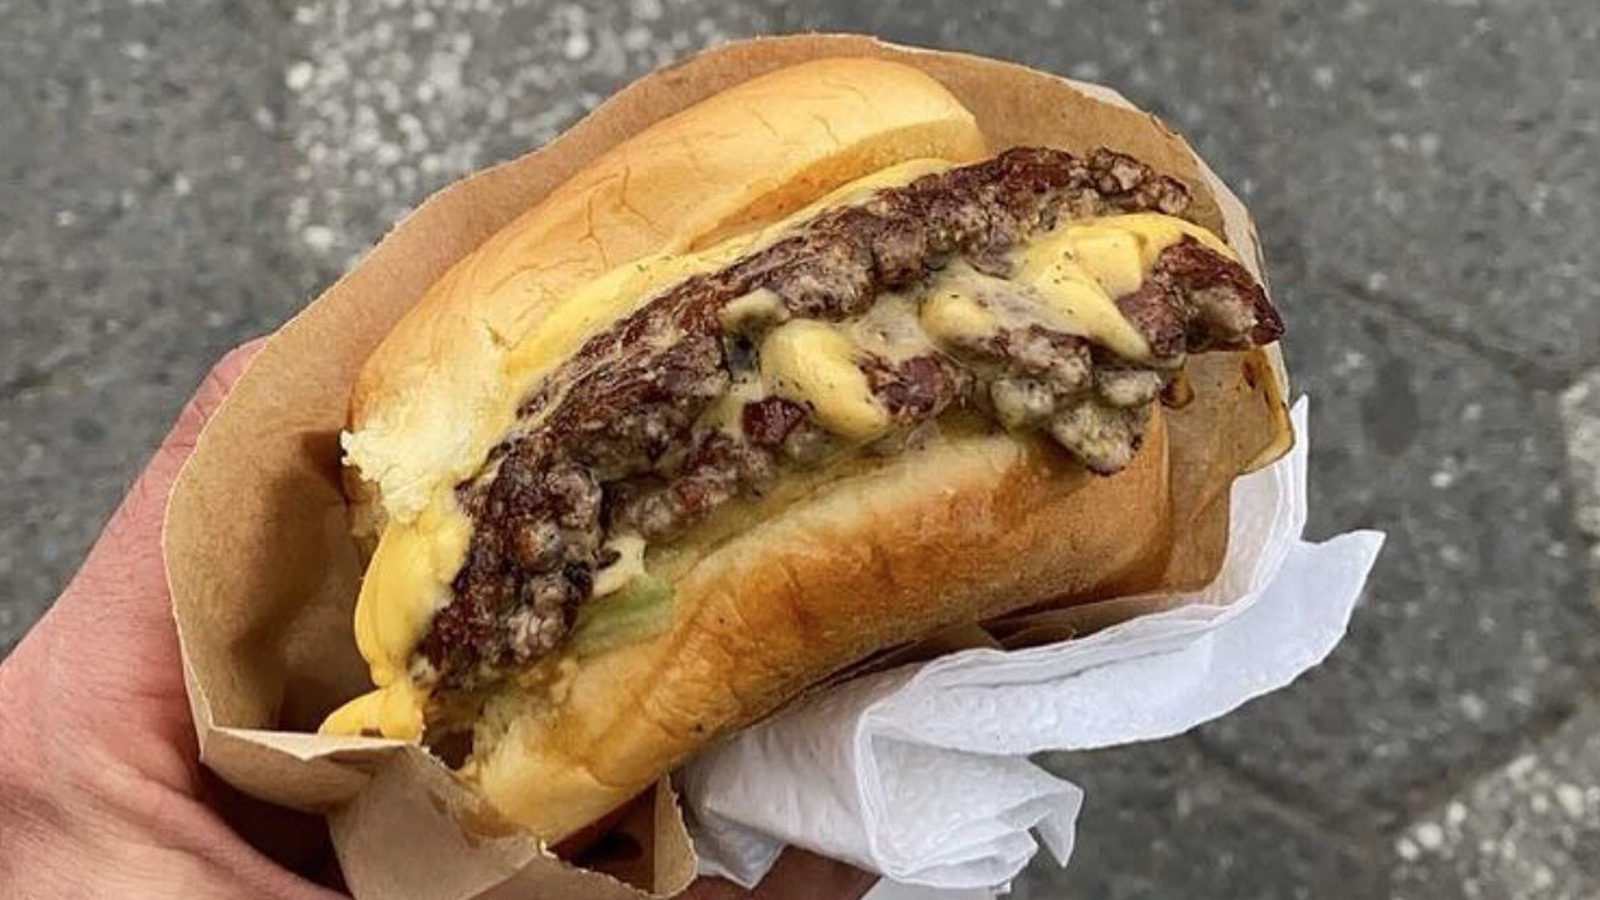 The Nyc Burger Pop Up That Let You To Barter For Your Meal 